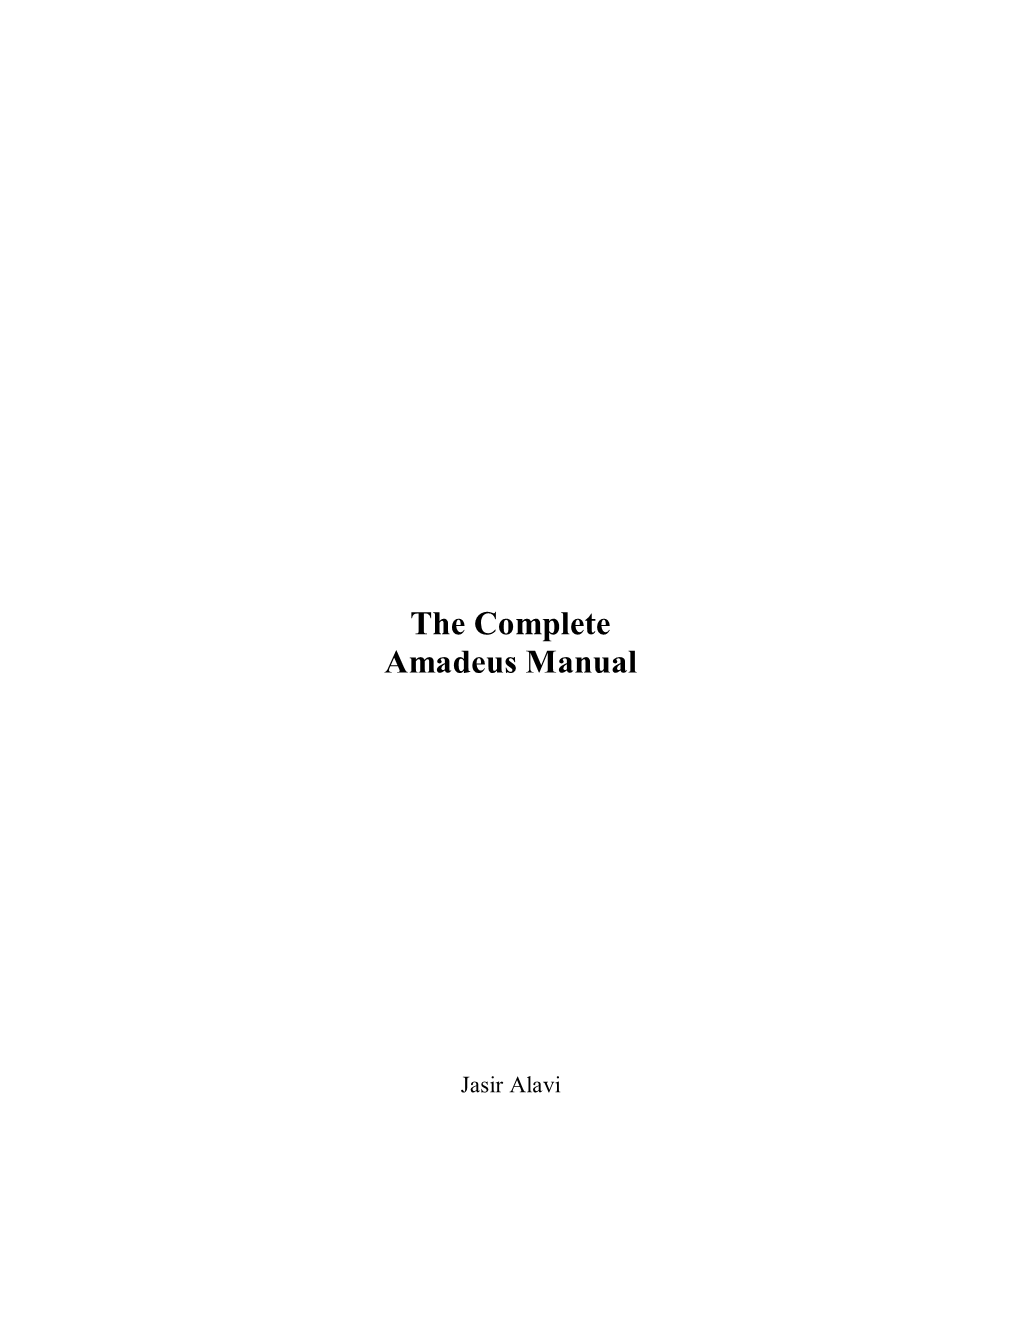 The Complete Amadeus Manual